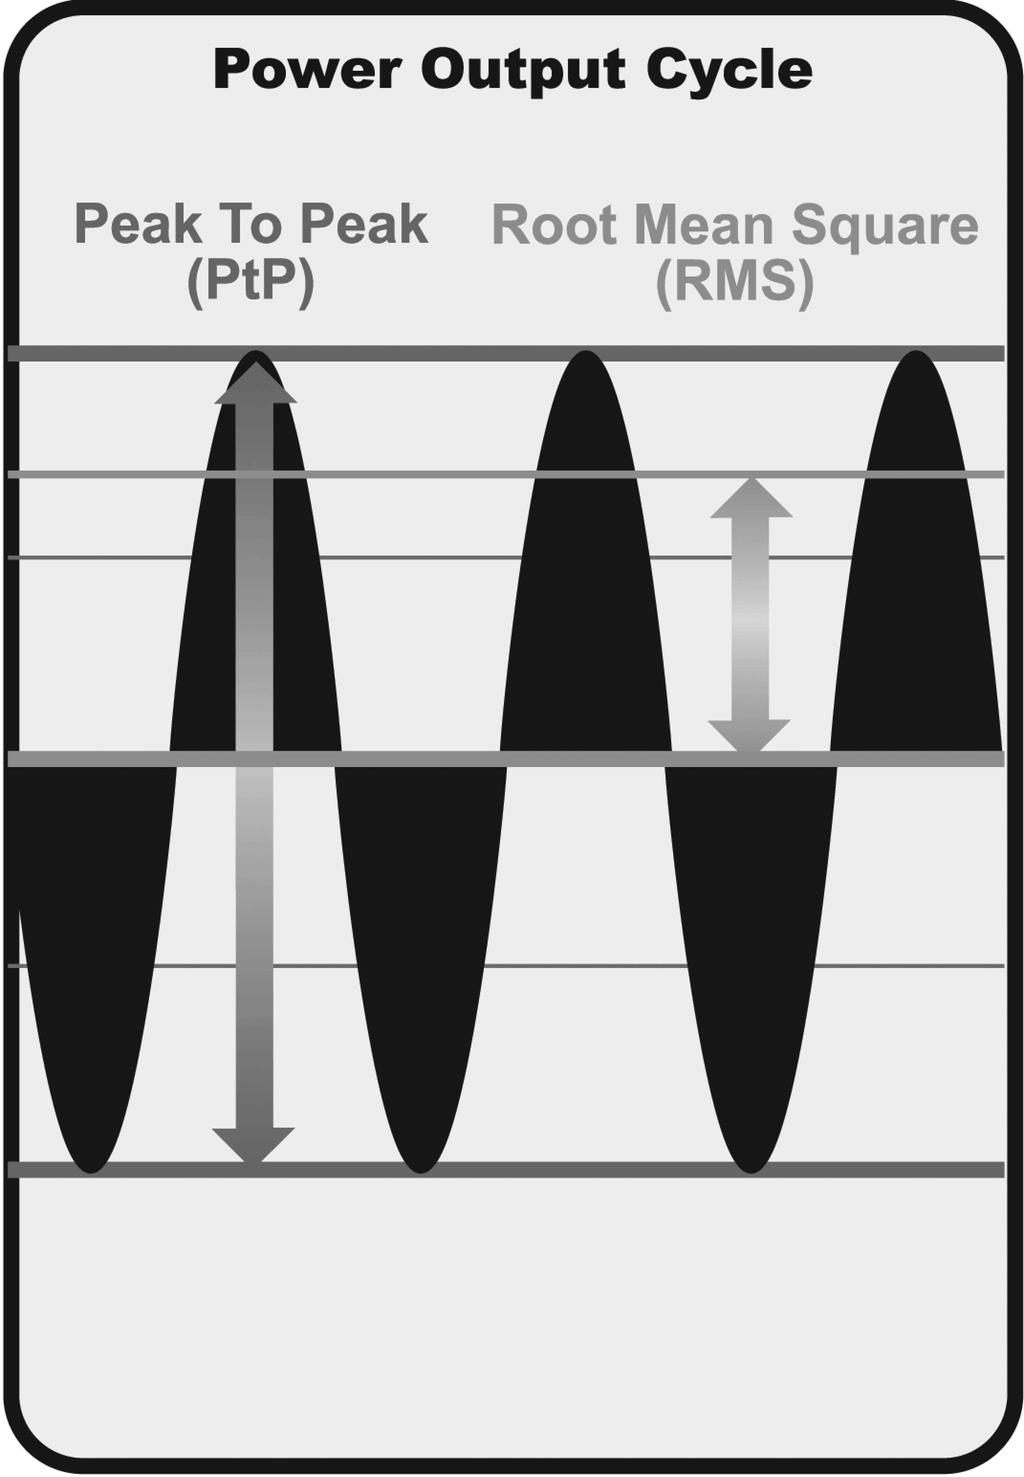 The sound pulses are transmitted at various frequencies depending on the application. Very high frequencies (455 khz) are used for greatest definition, but the operating depth is limited.